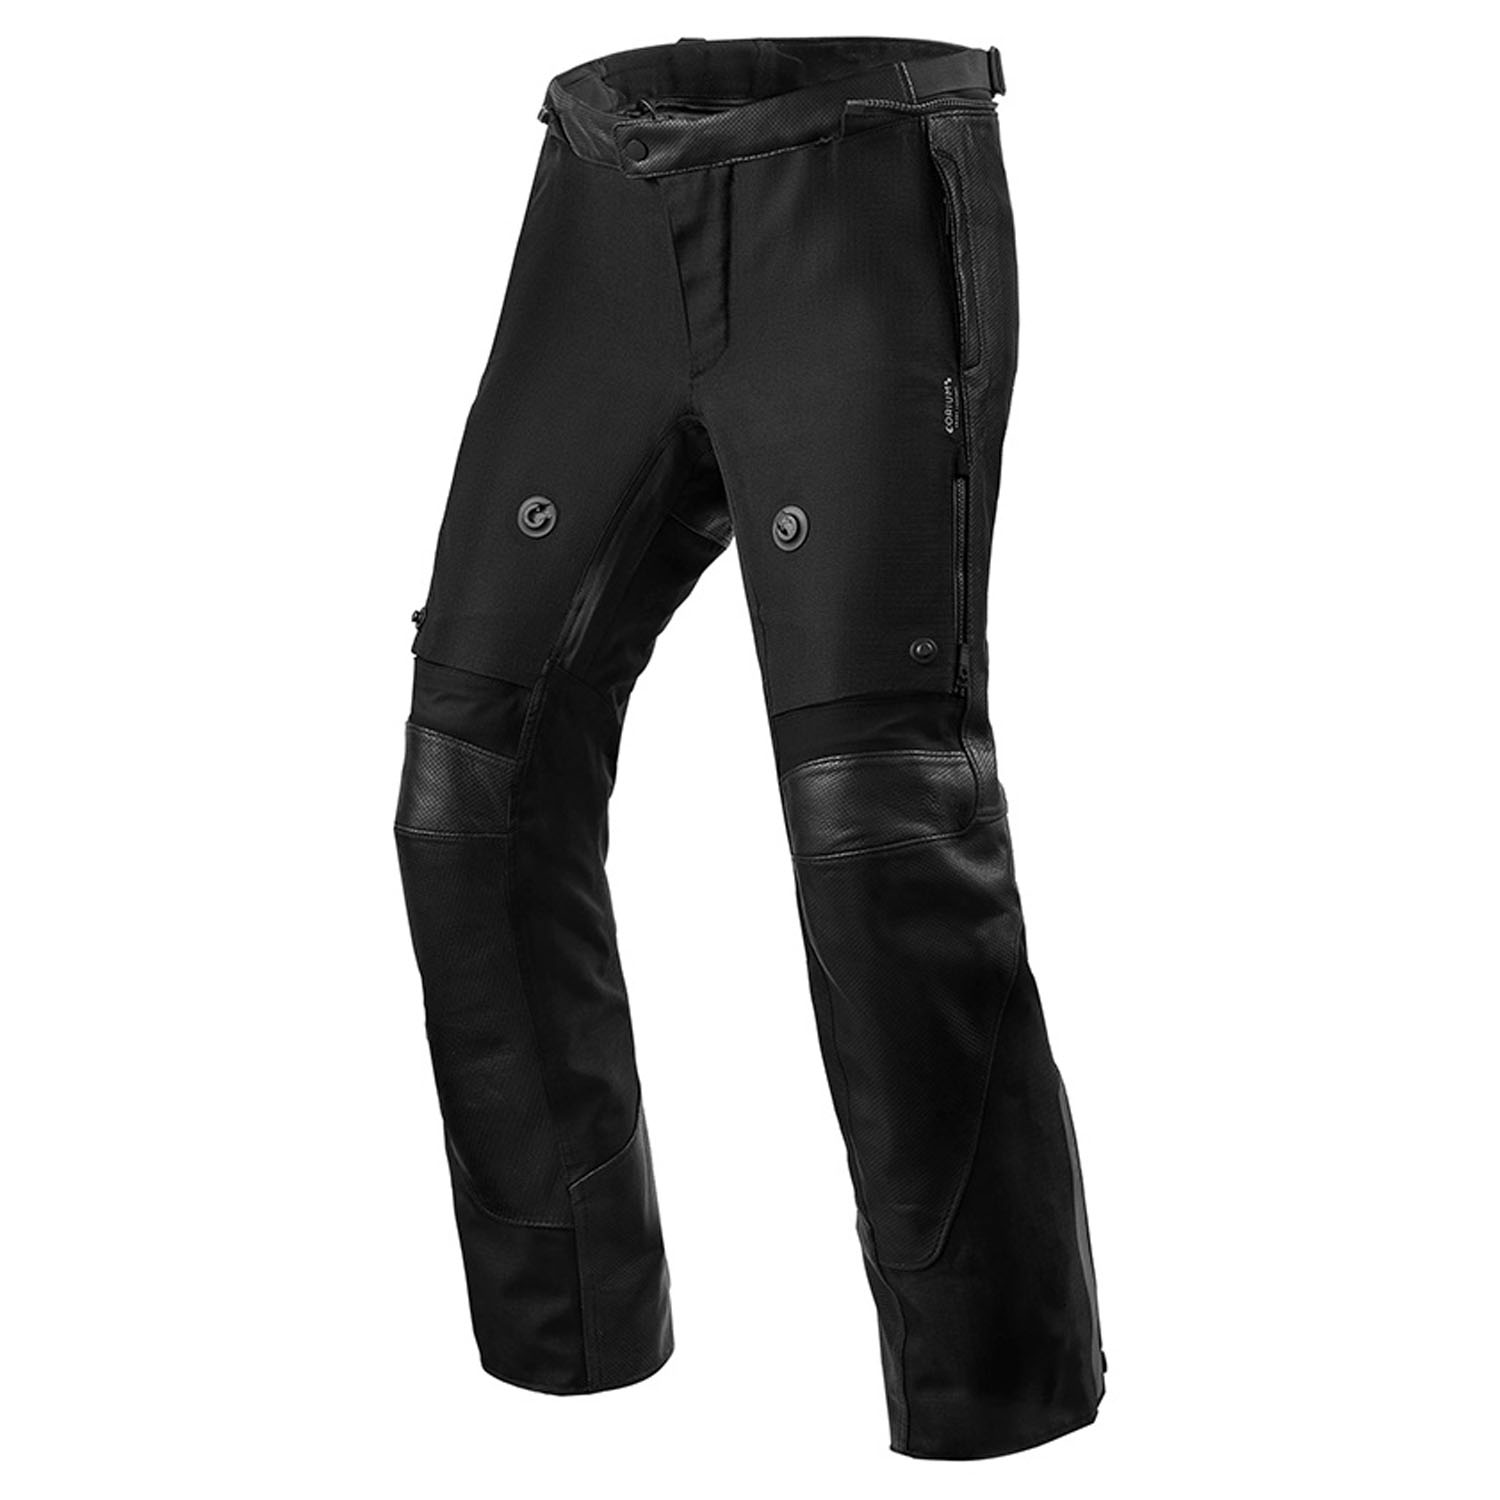 Image of REV'IT! Trousers Valve H2O Black Standard Motorcycle Pants Size 56 ID 8700001315838